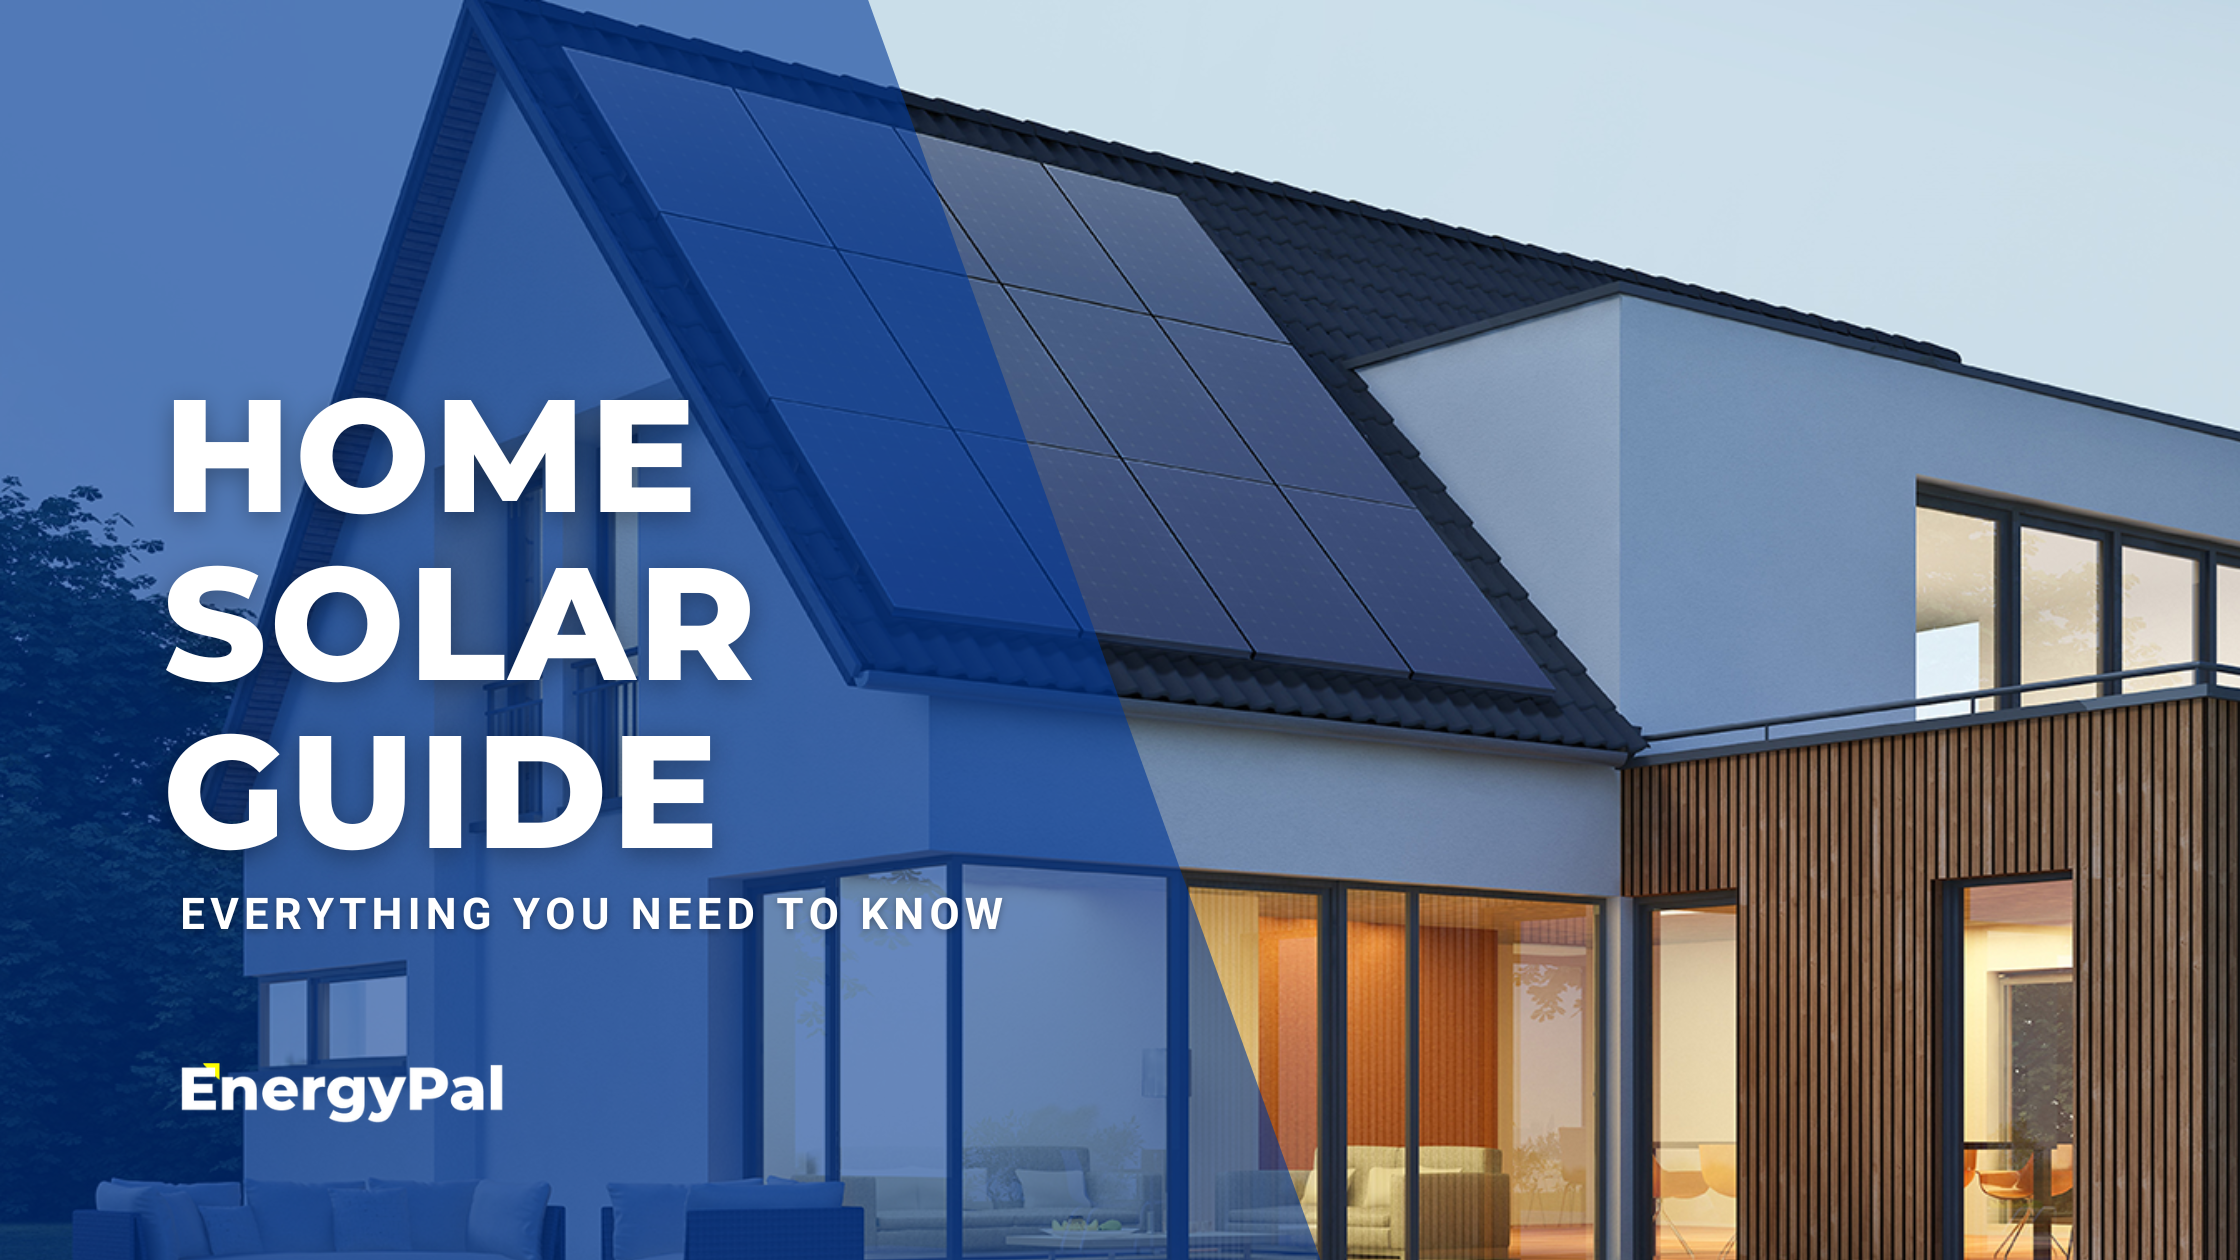 Guide on home solar